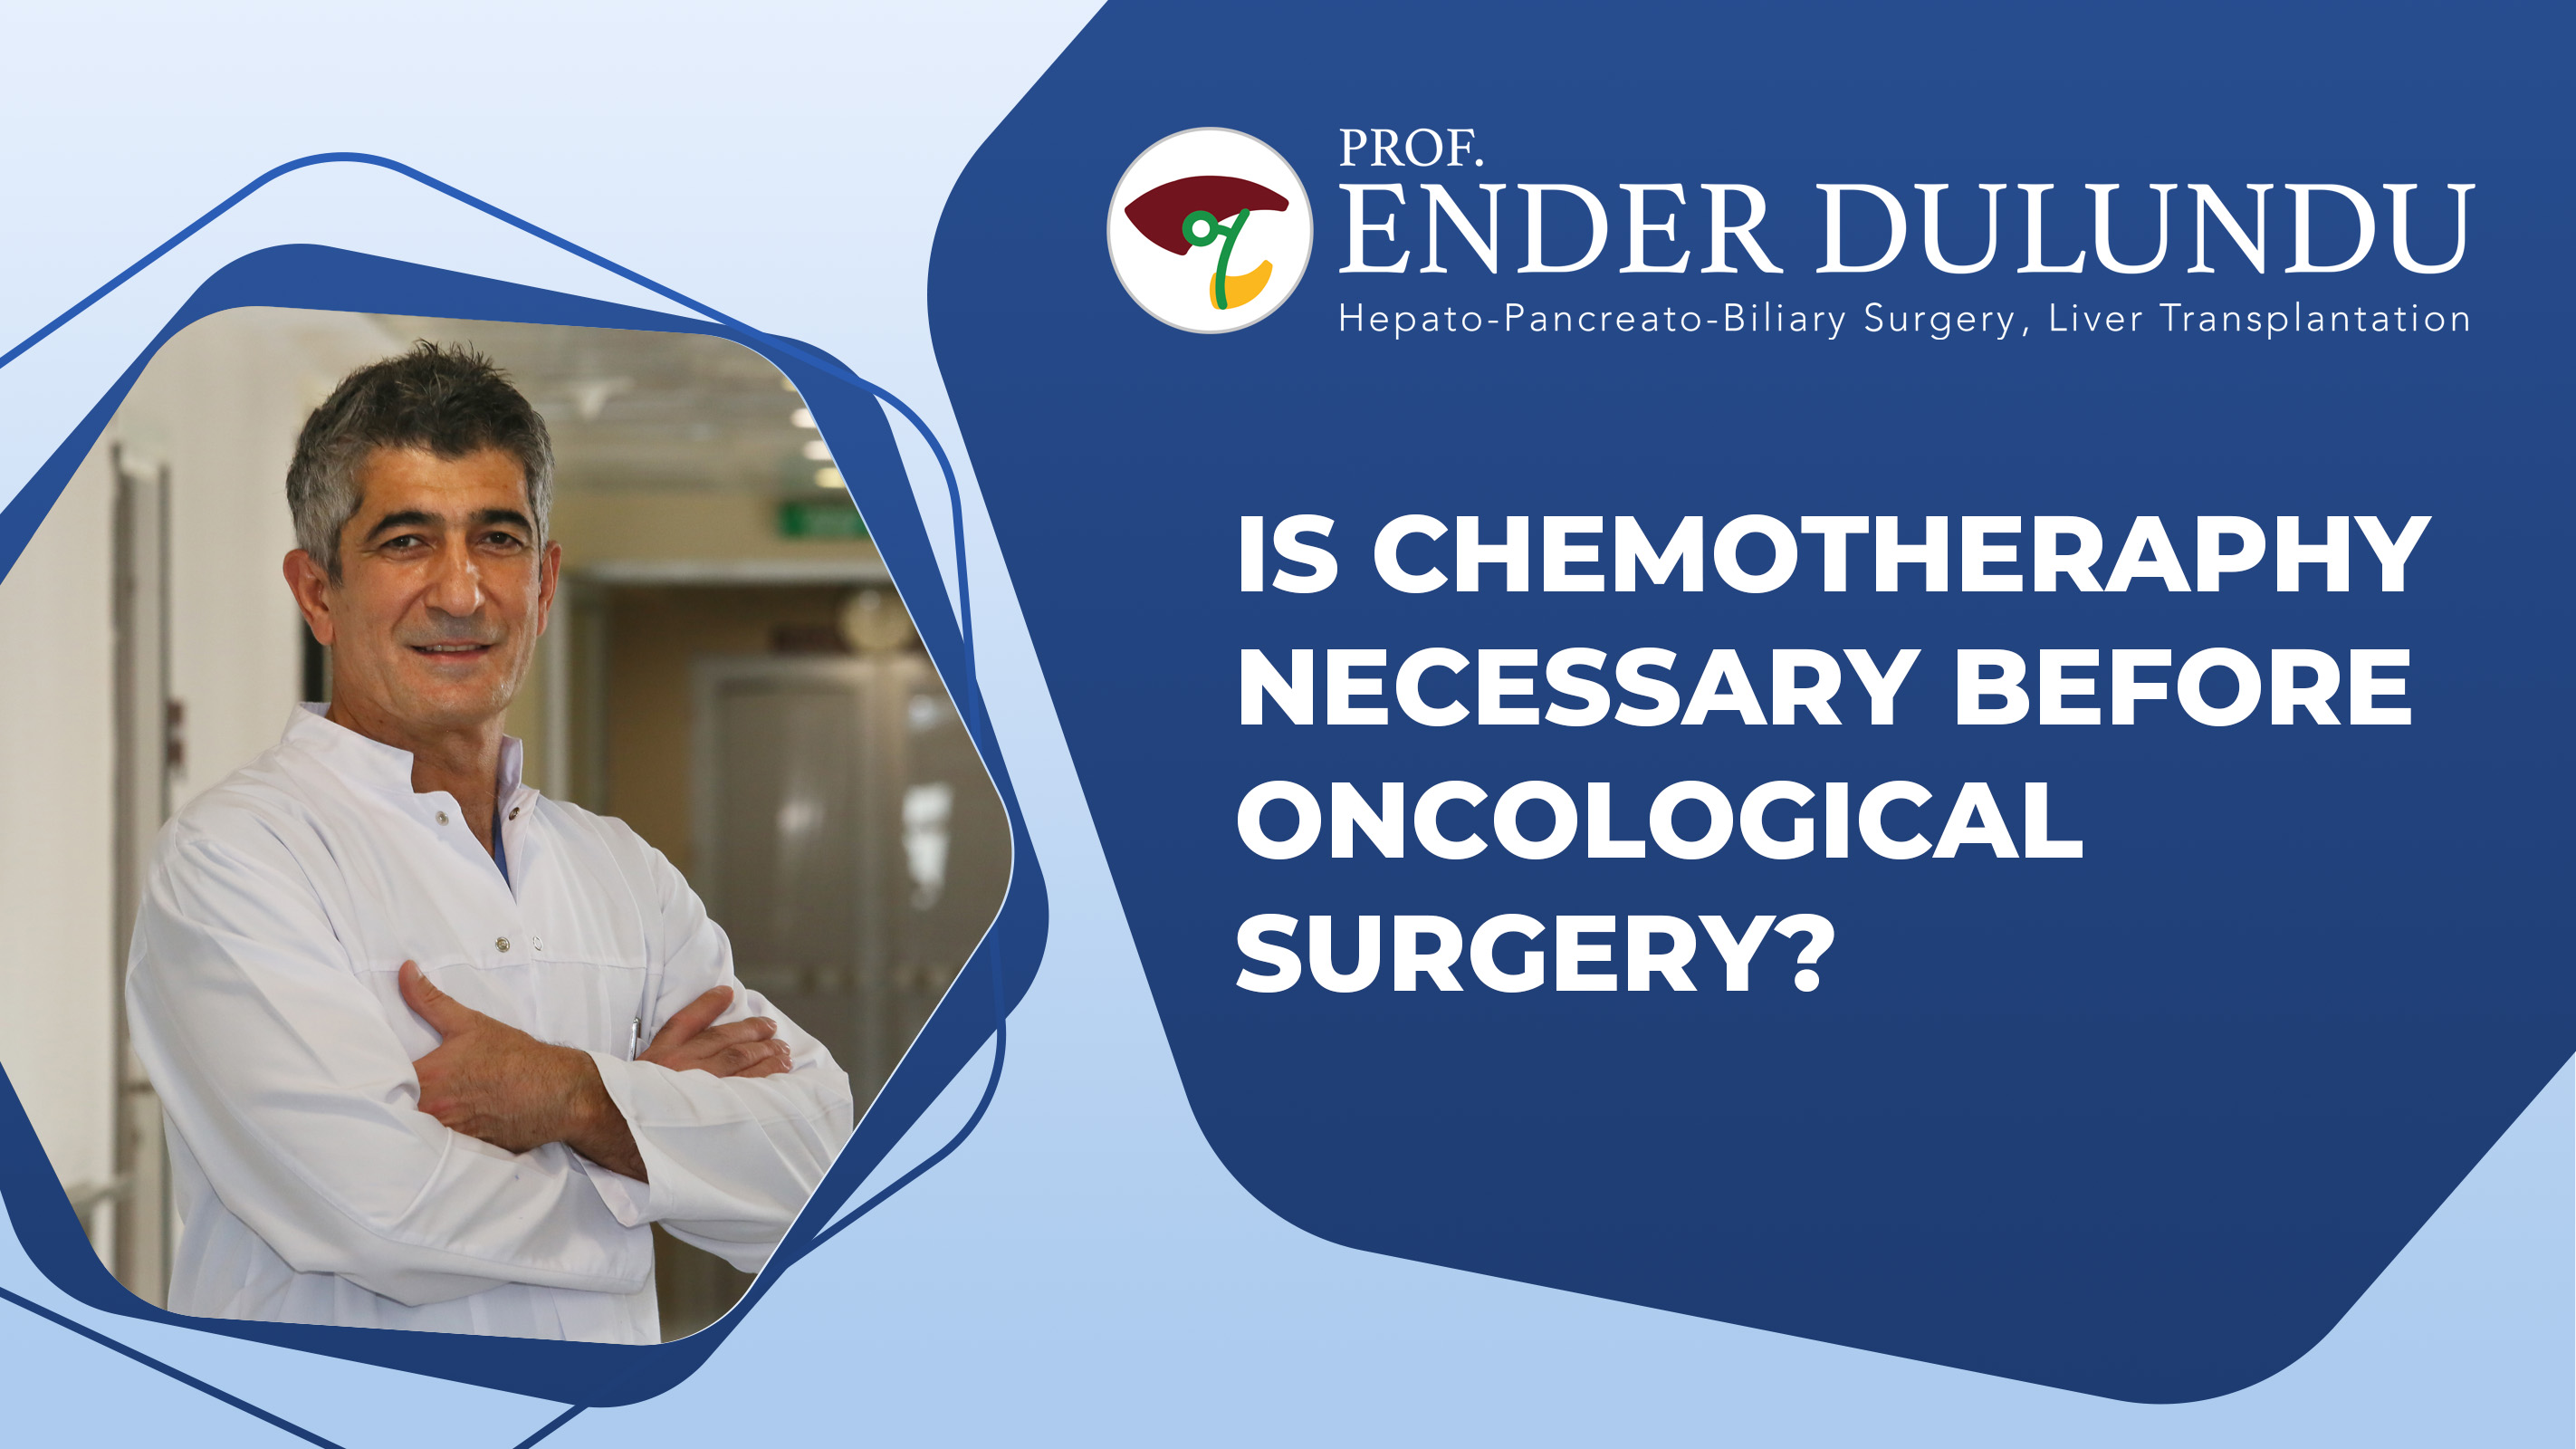 Is Chemotheraphy Necessary Before Oncological Surgery?